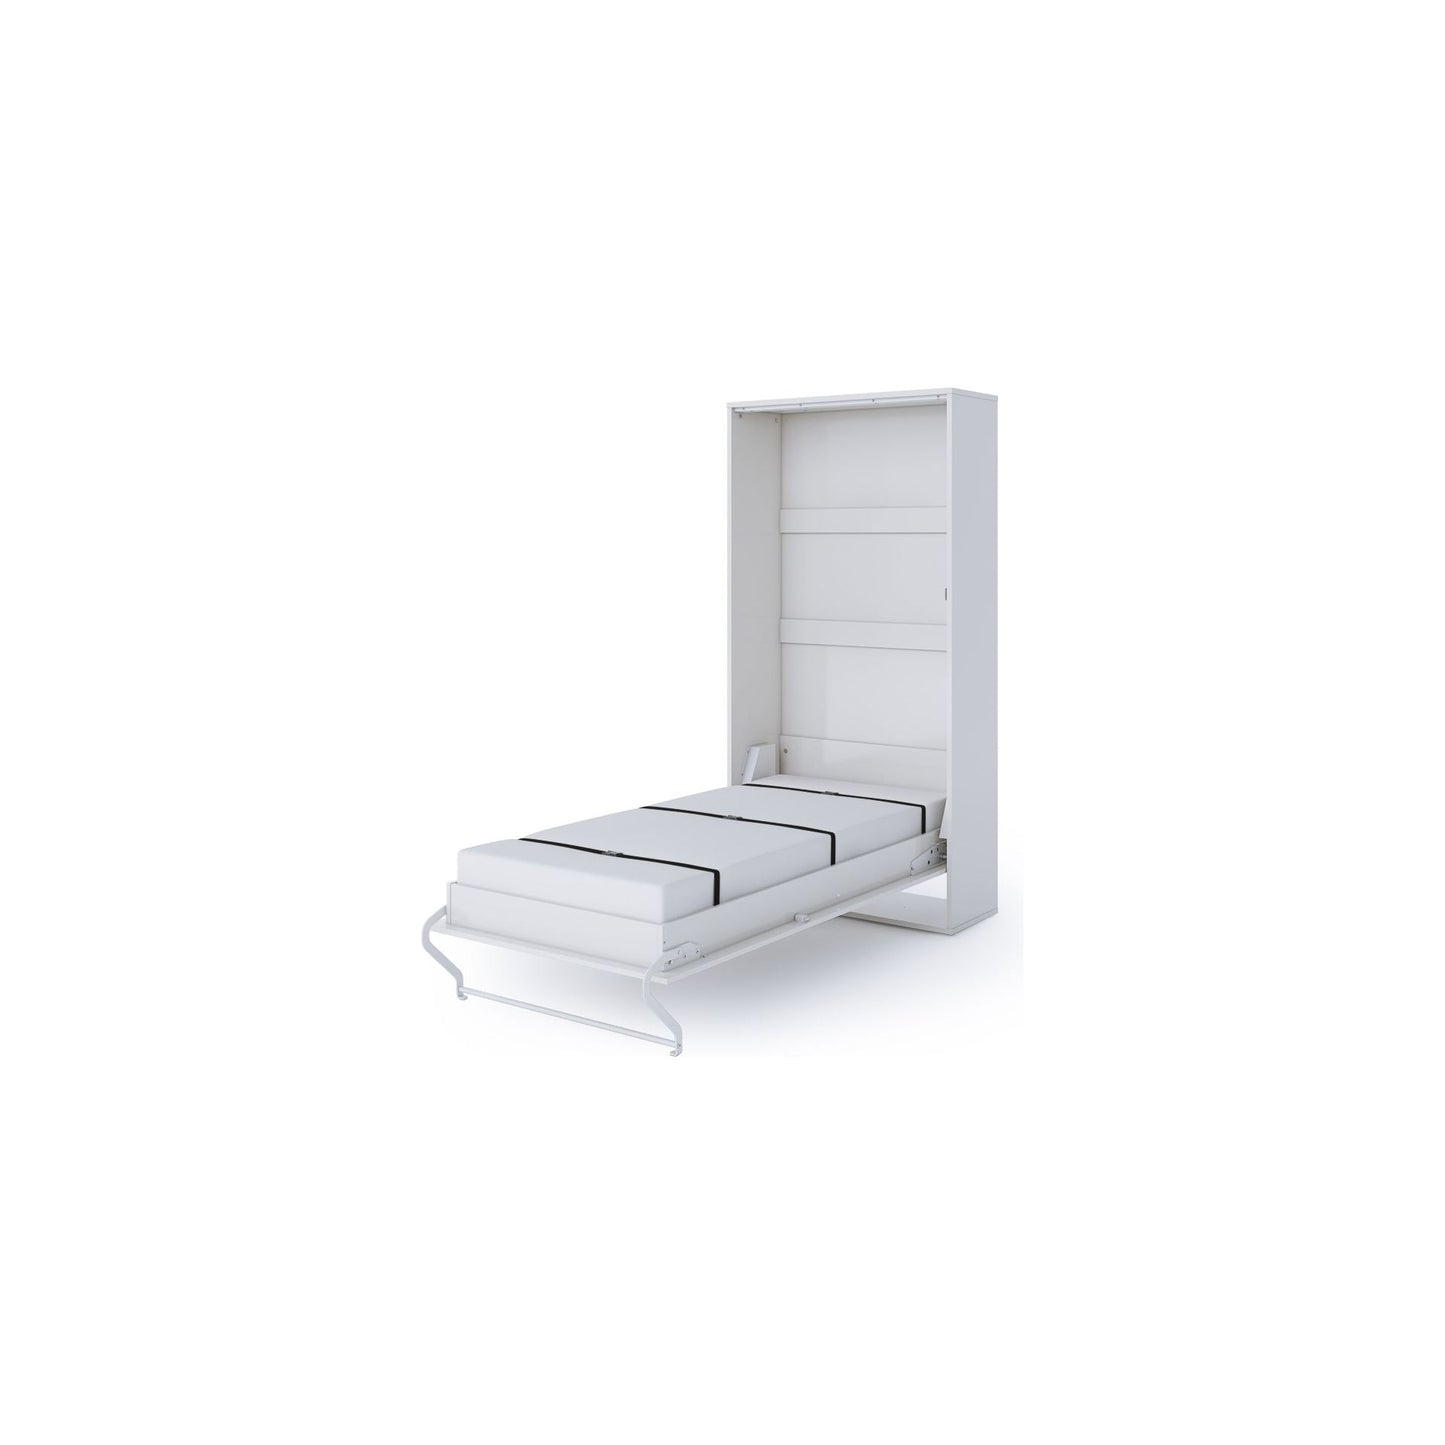 Maxima House Maxima House Vertical Murphy Bed Invento, European Twin Size with mattress